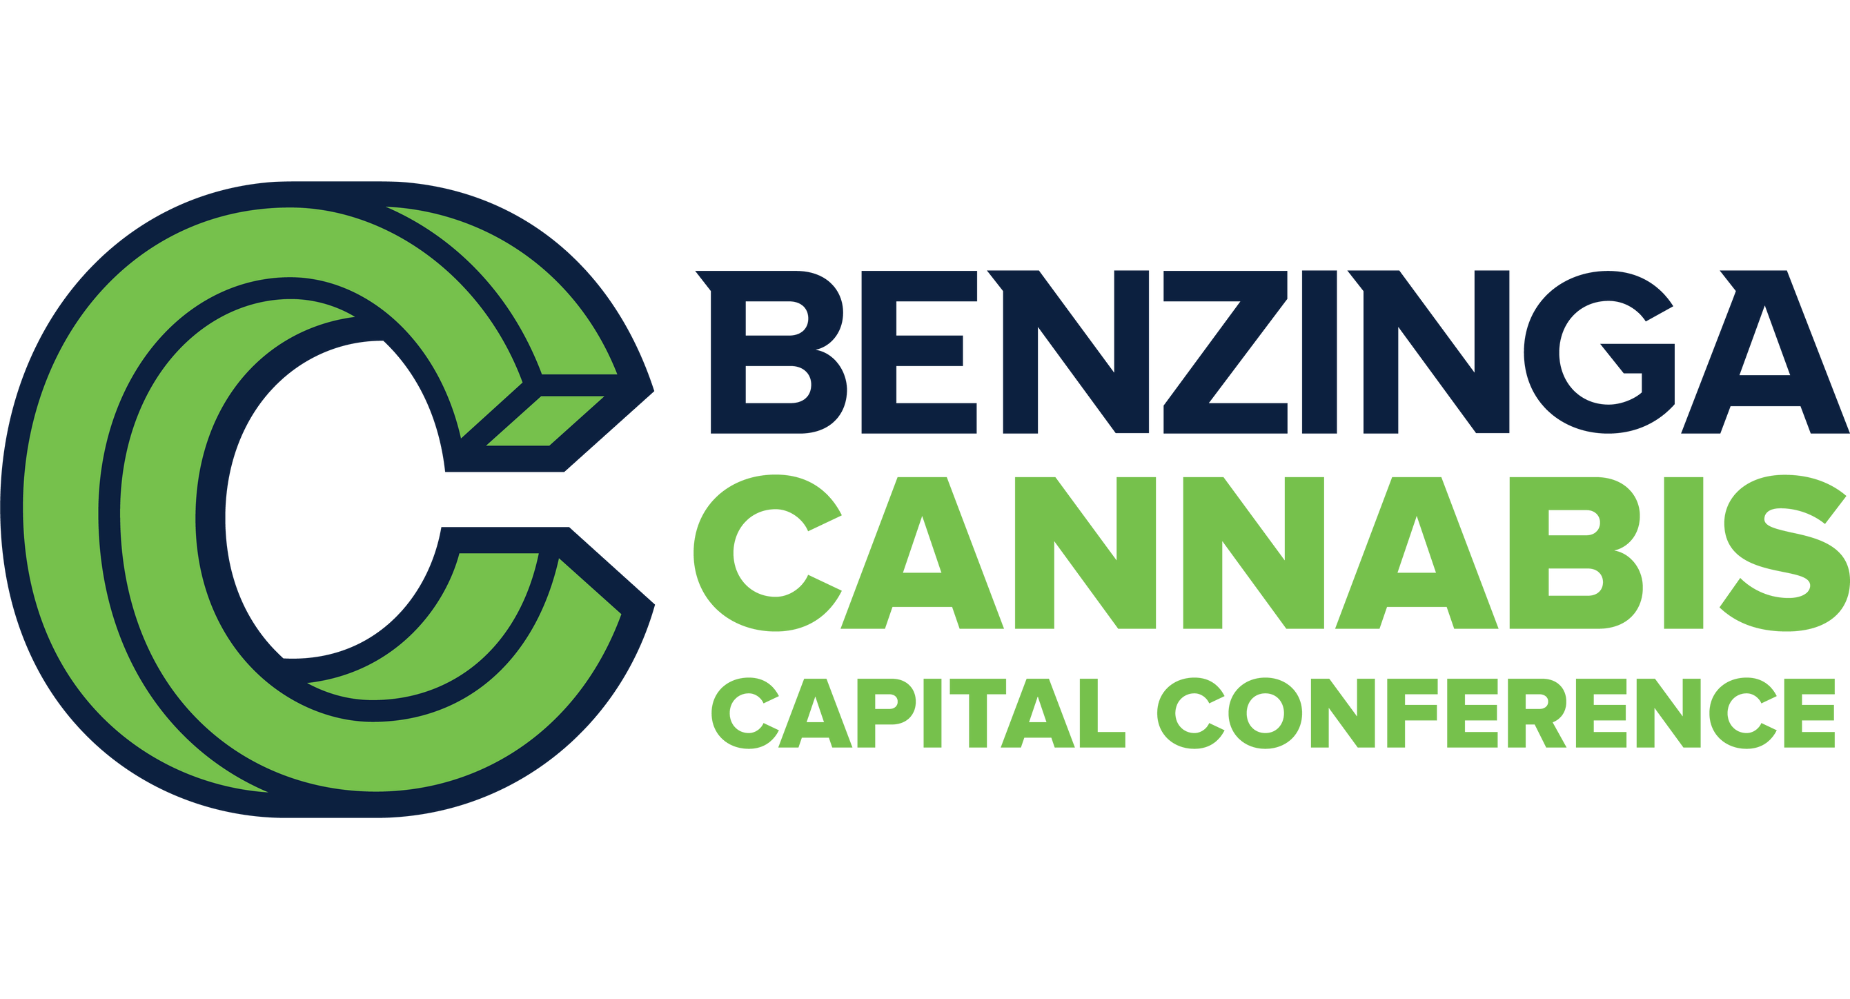 NEO Exchange Discusses Recent Partnership And More At Benzinga Cannabis Capital Conference